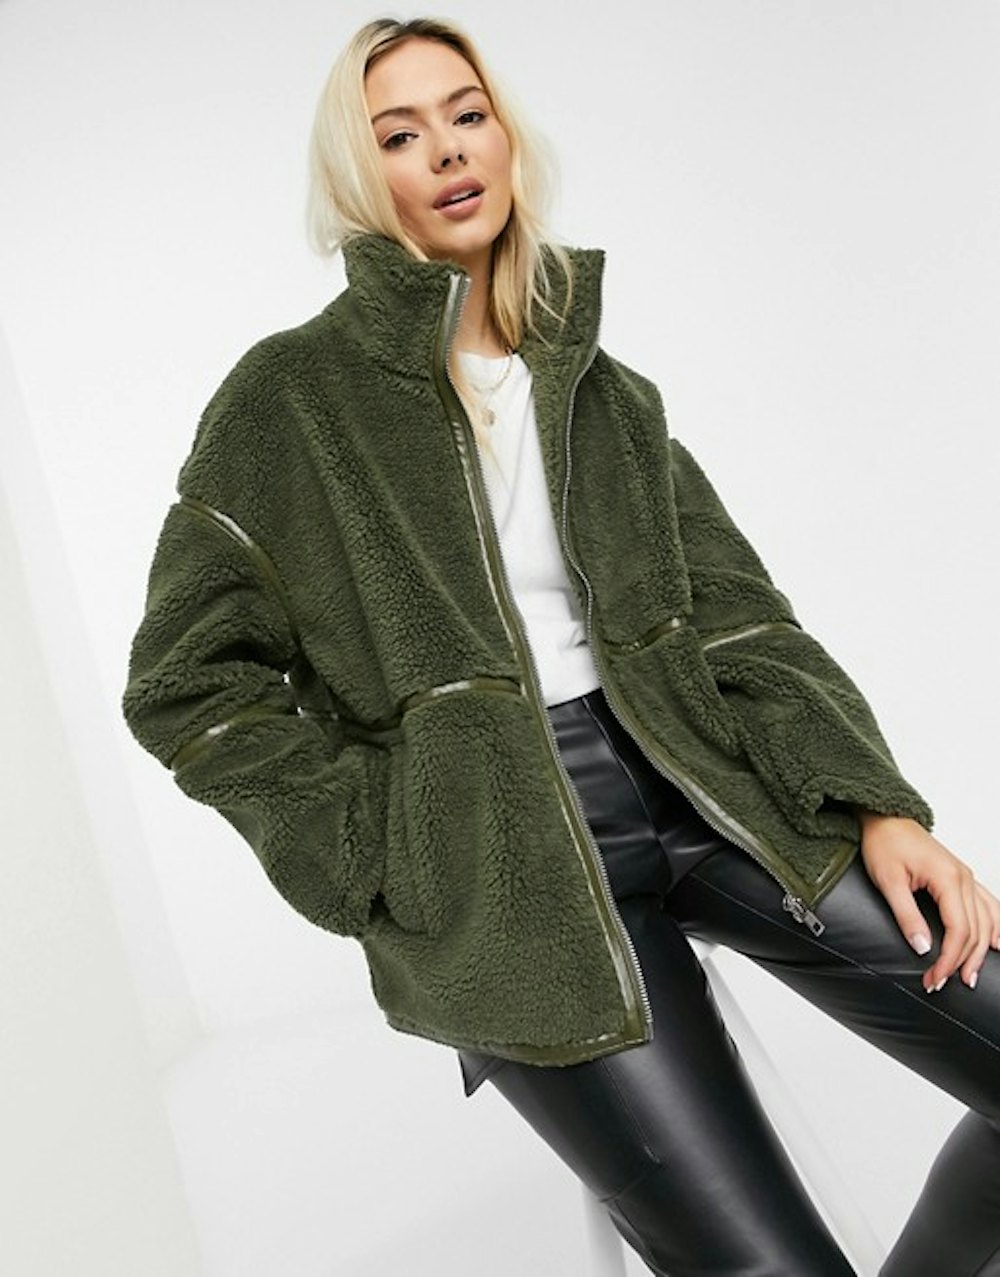 Shop Stylish Fleece Jackets At Every Price Point